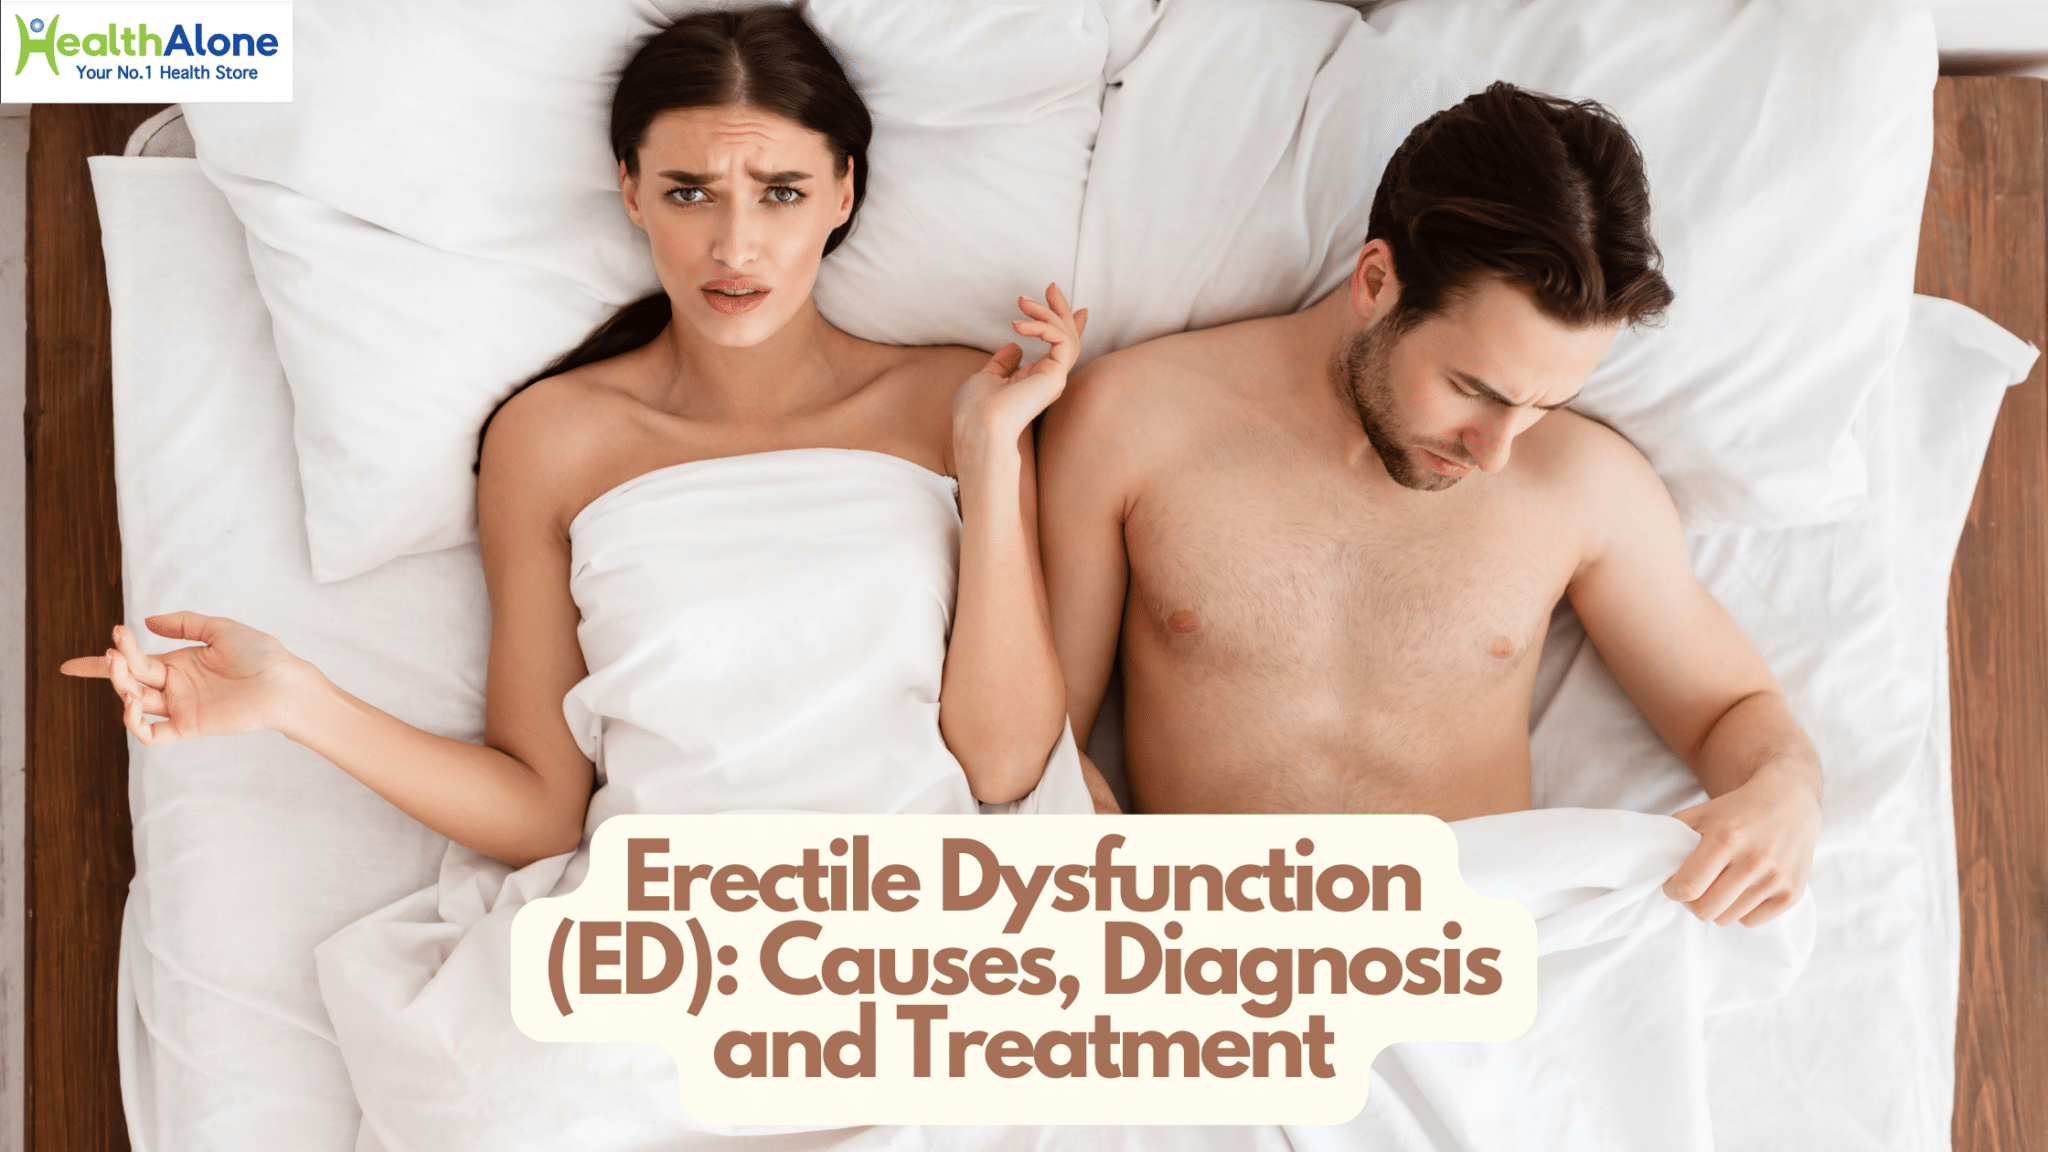 Erectile Dysfunction (ED): Causes, Diagnosis and Treatment